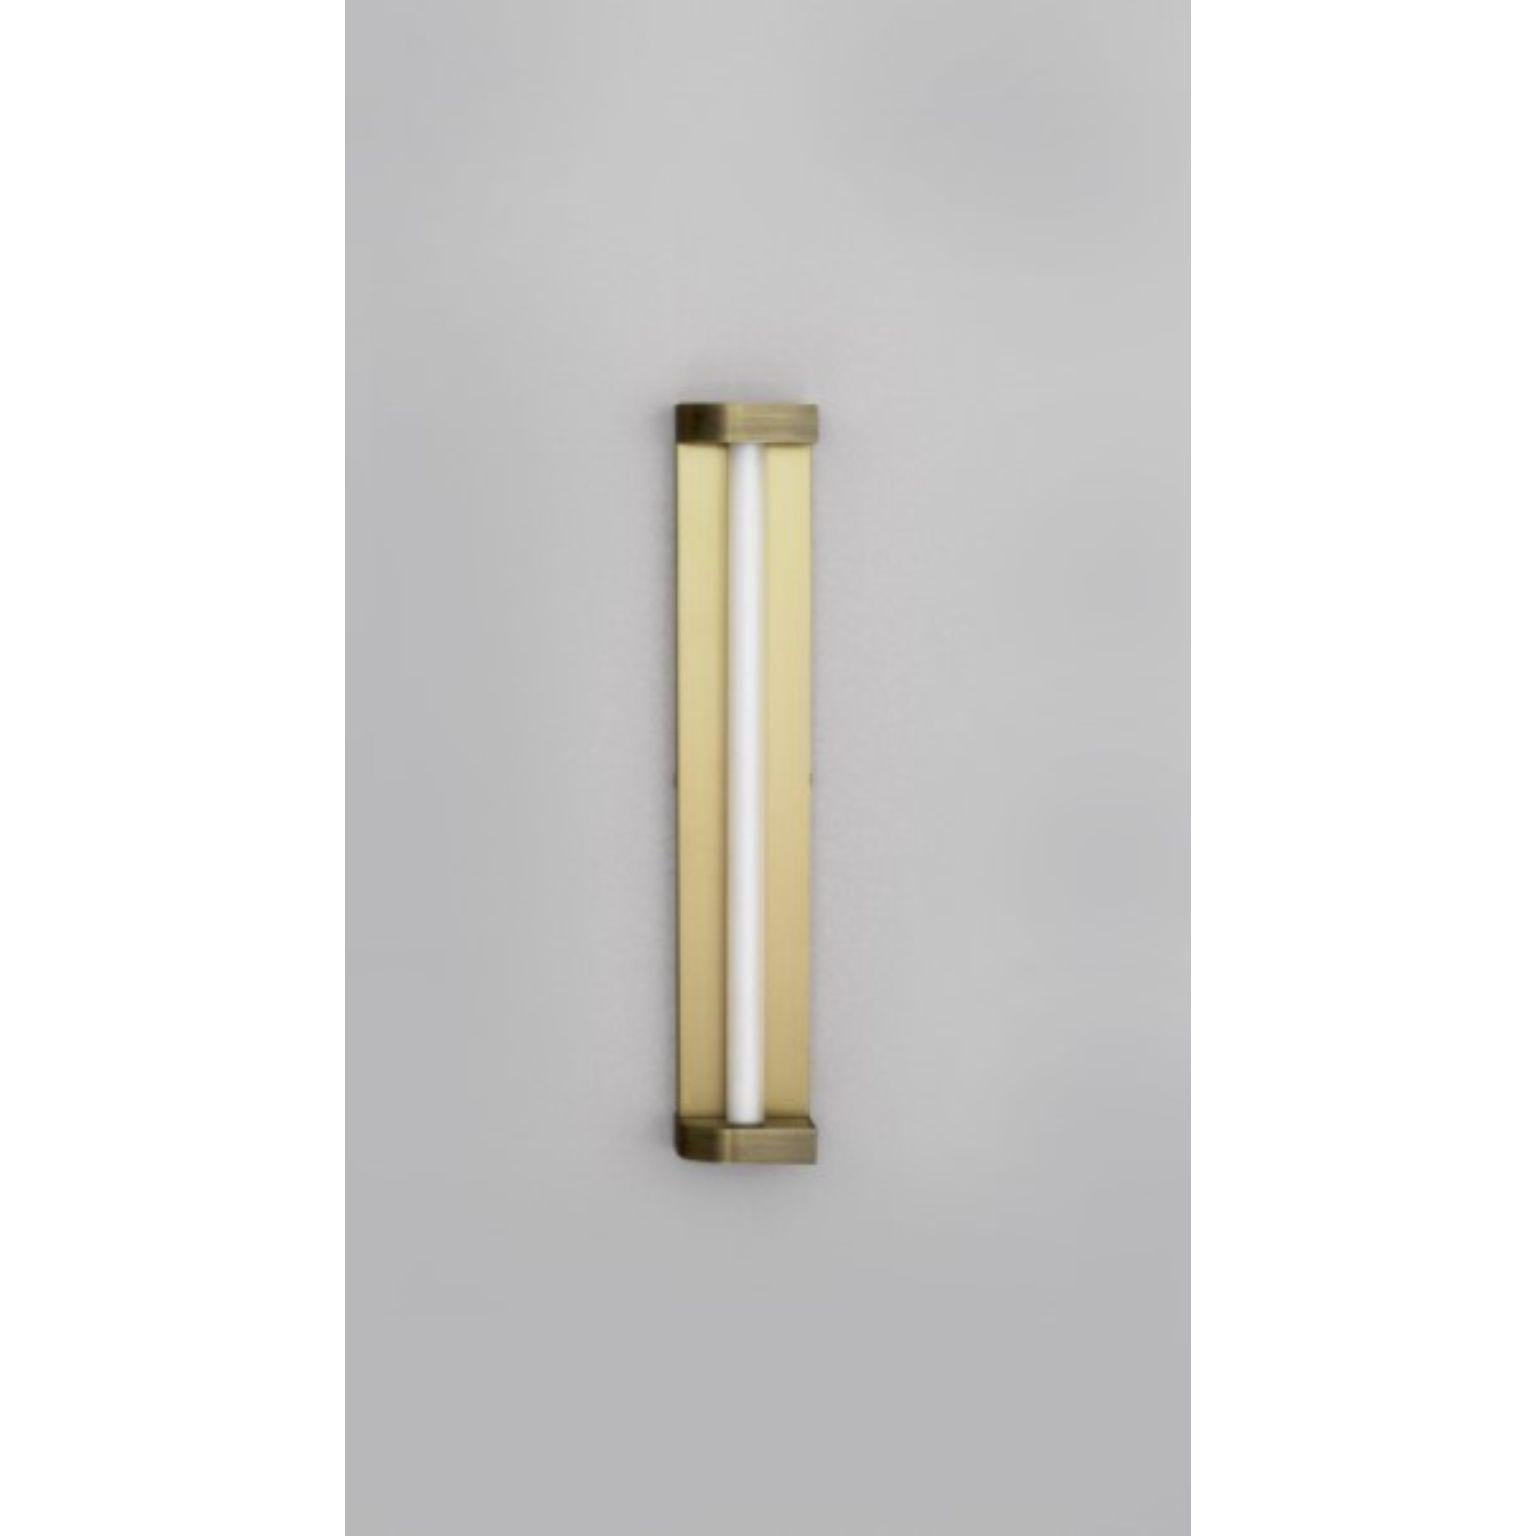 Rounded Corner wall light by Square in Circle
Dimensions: D5 x W7 x H40 cm
Materials:Brushed brass/ medium bronze/ opaque perspex
Other finishes available.

A tall, rectangular bathroom wall light with curved returns at top and bottom and an